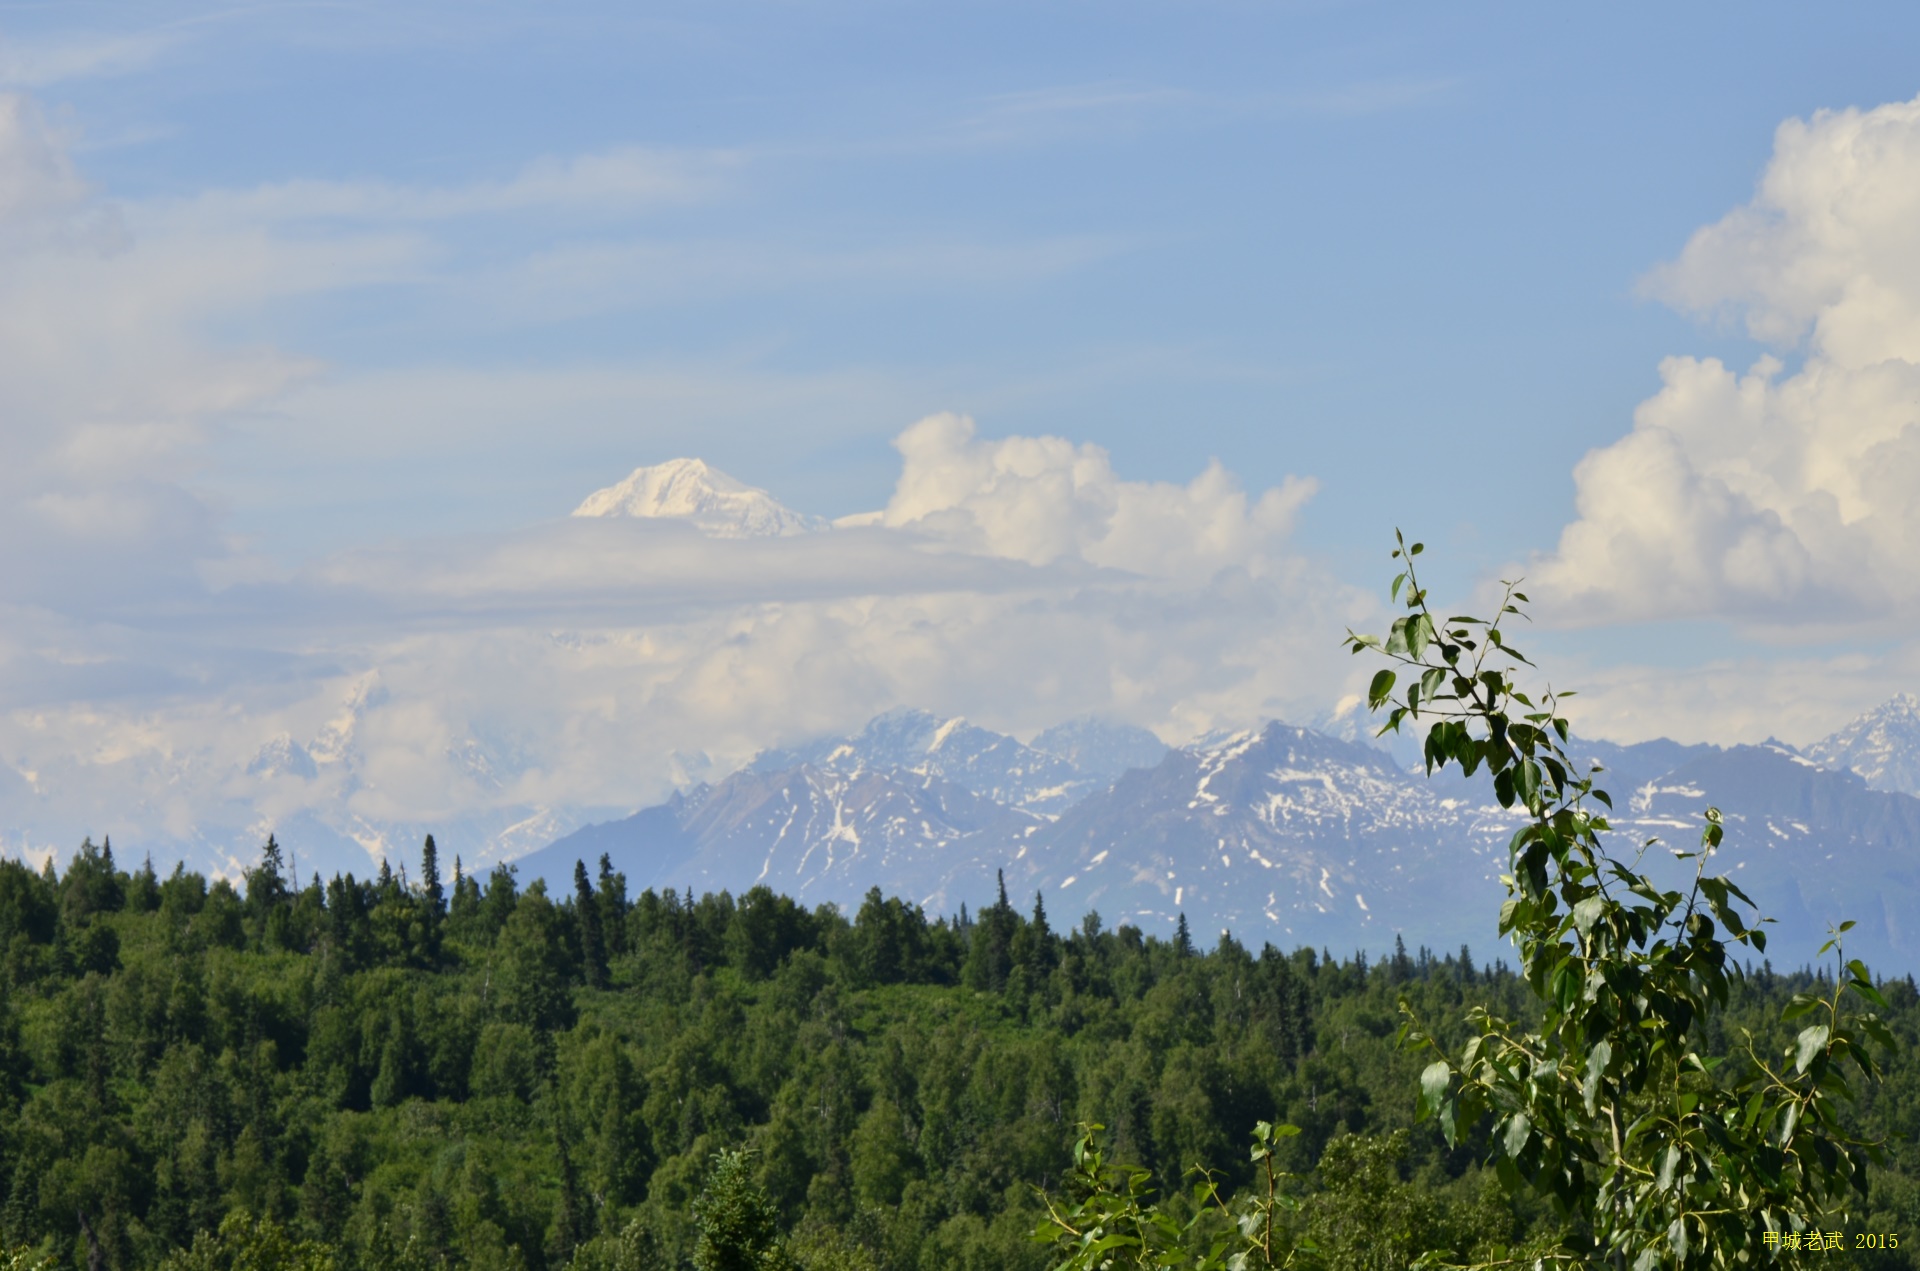 The river and mountains in Kalkeetna